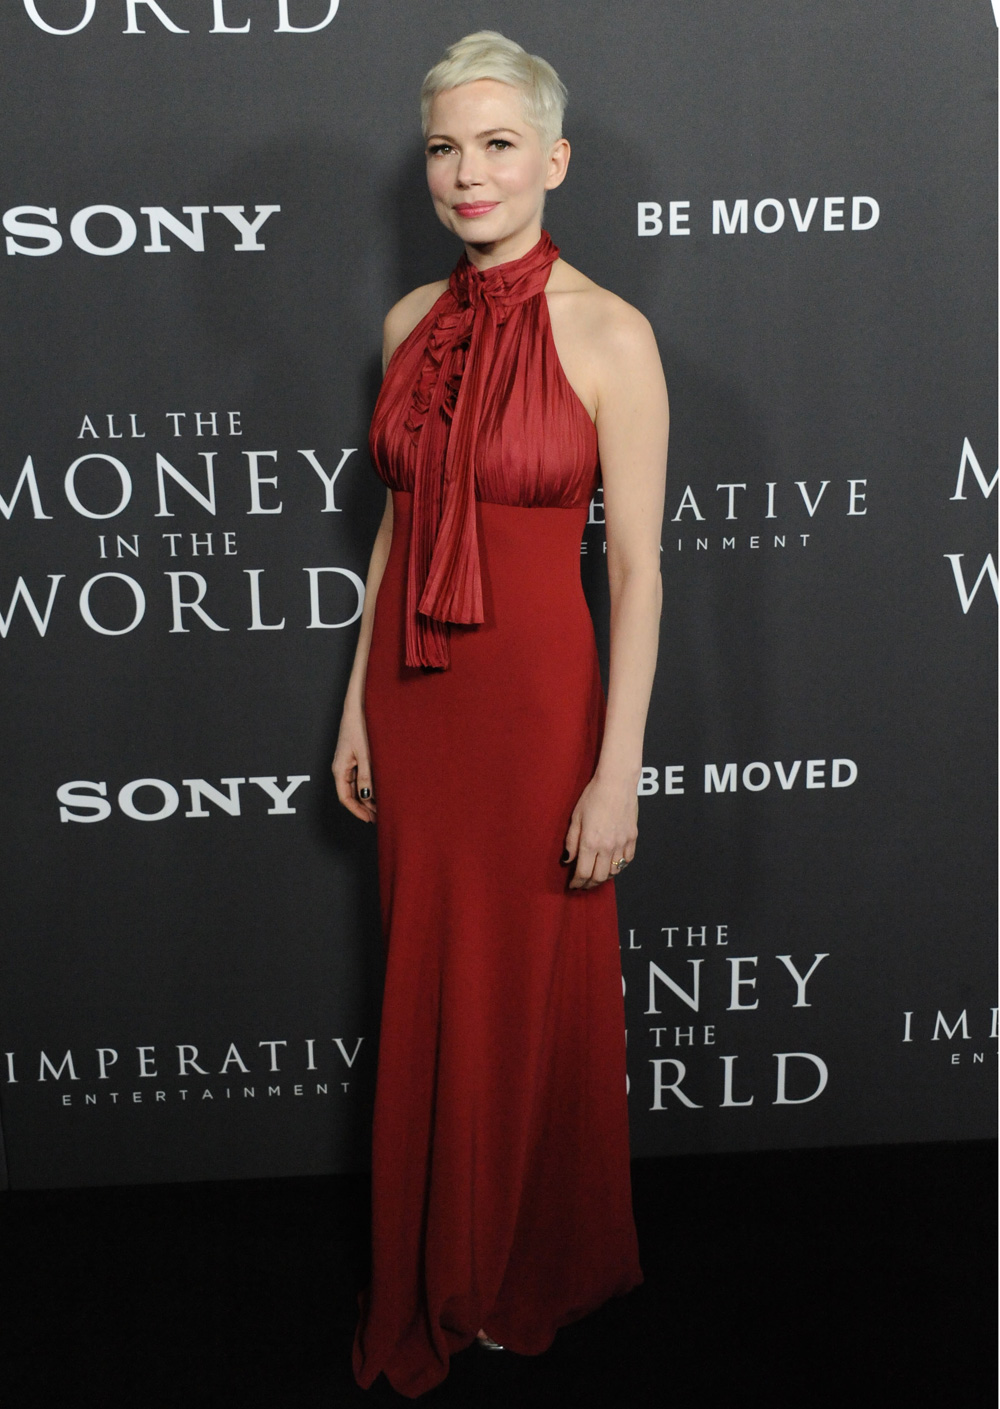 Michelle Williams in Louis Vuitton for 'All the Money in the World' Film  Premiere